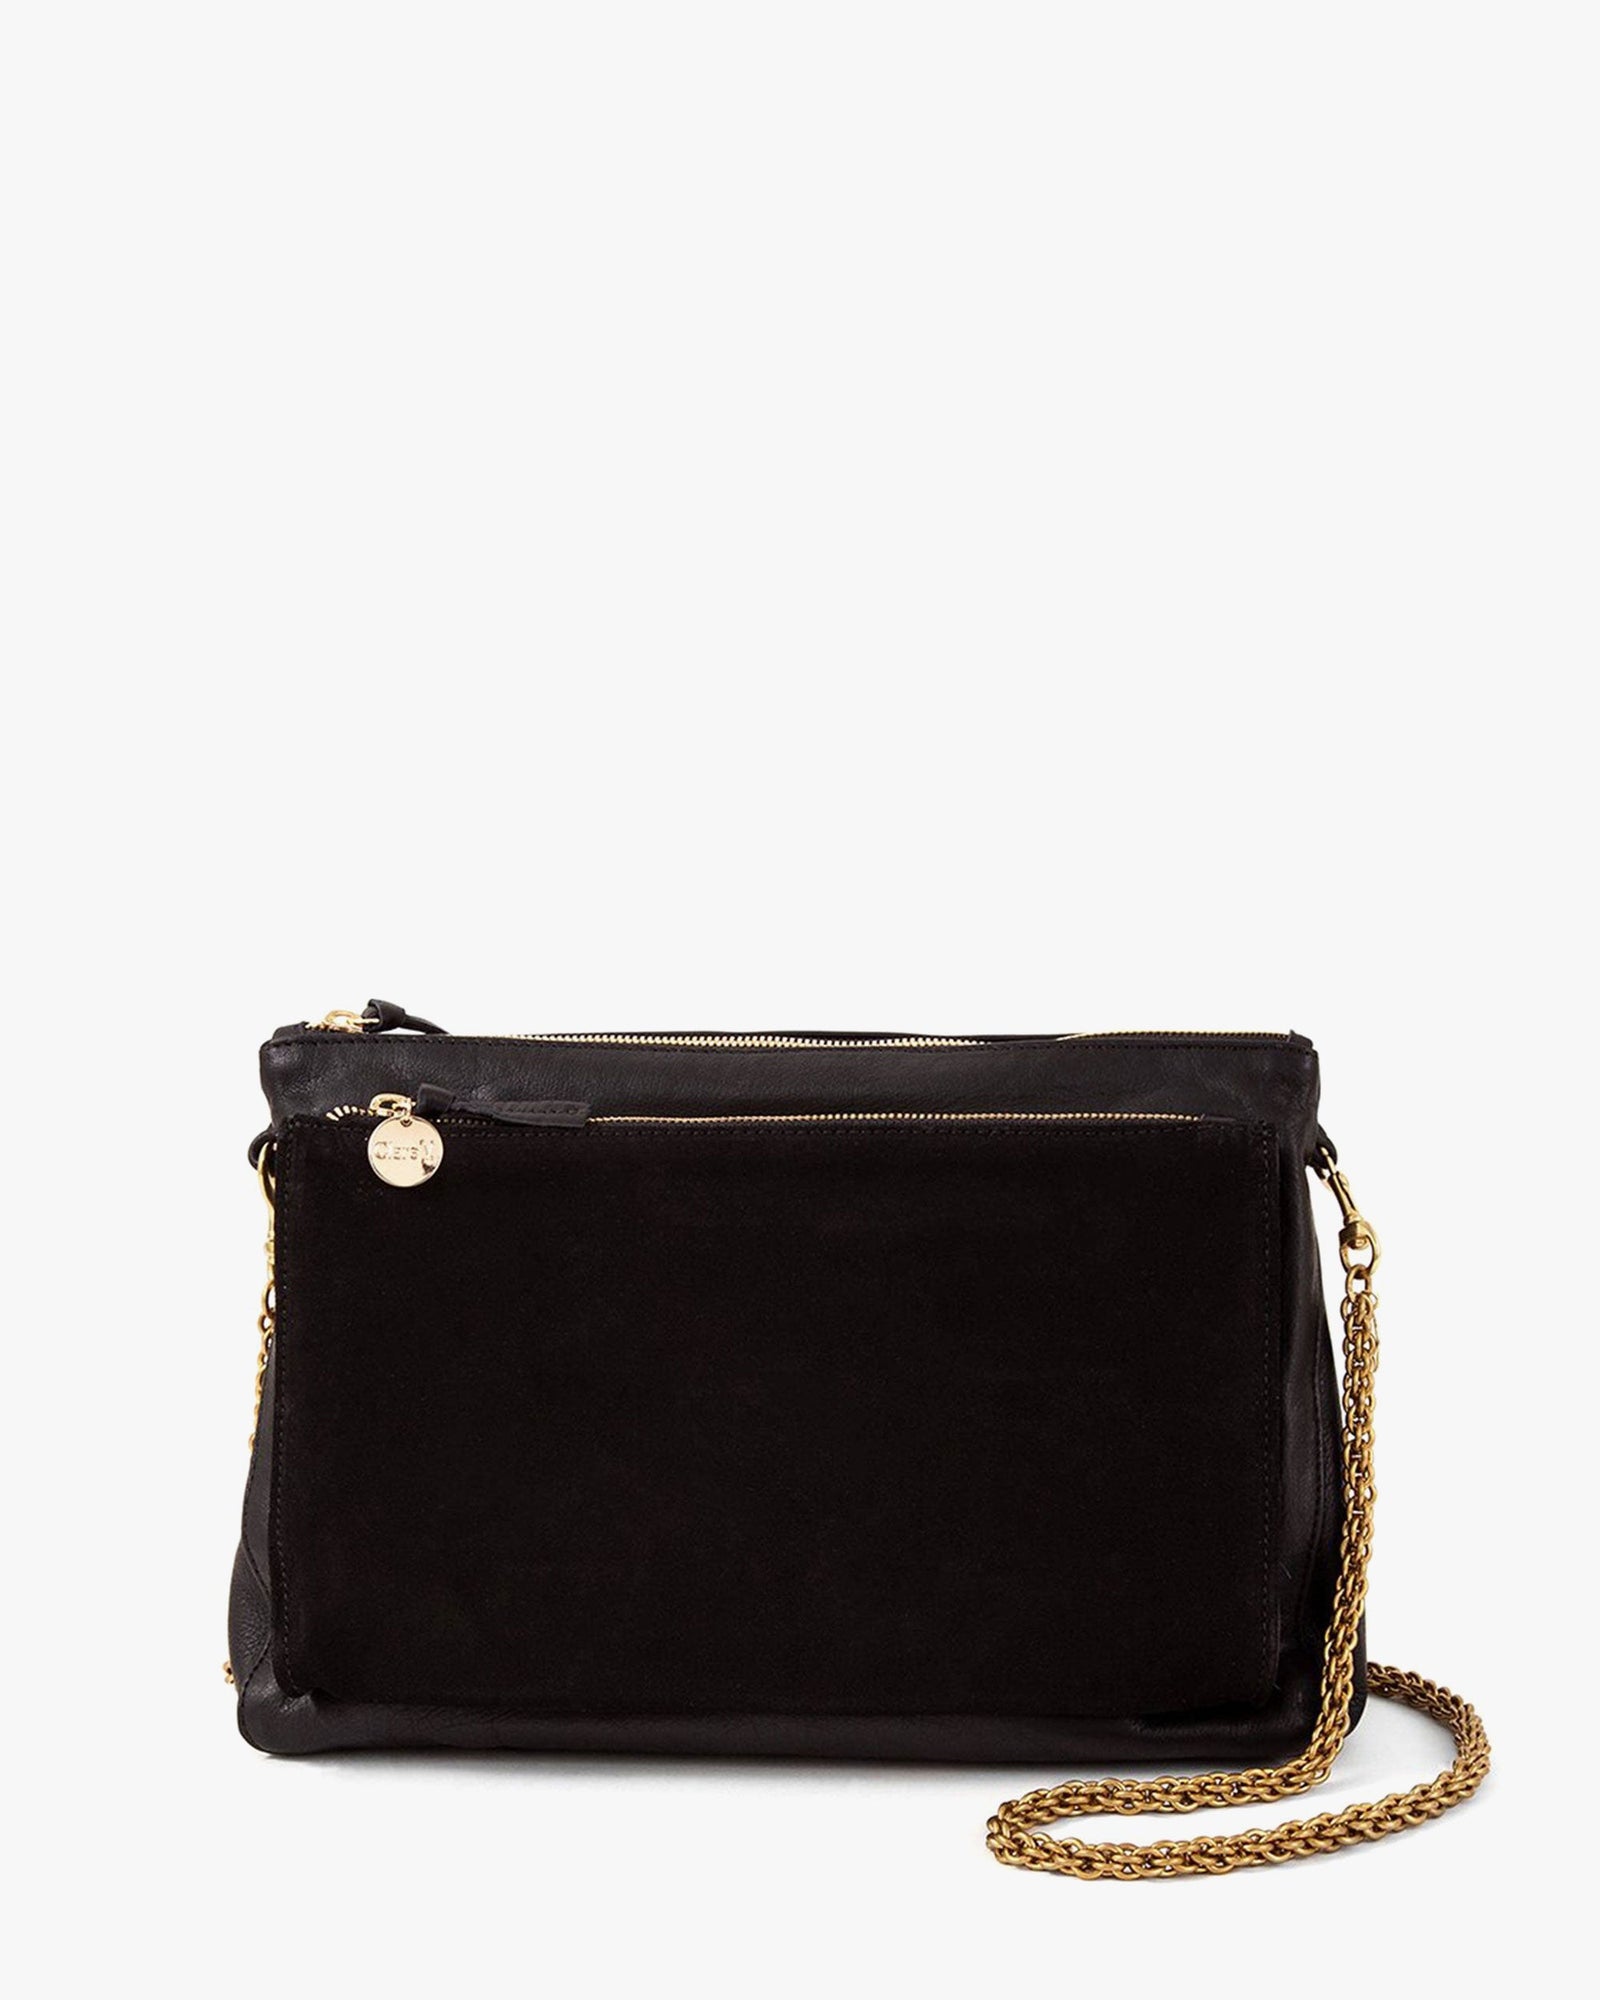 Black Gosee Clutch with Brass Thick Chain Strap Attached To It